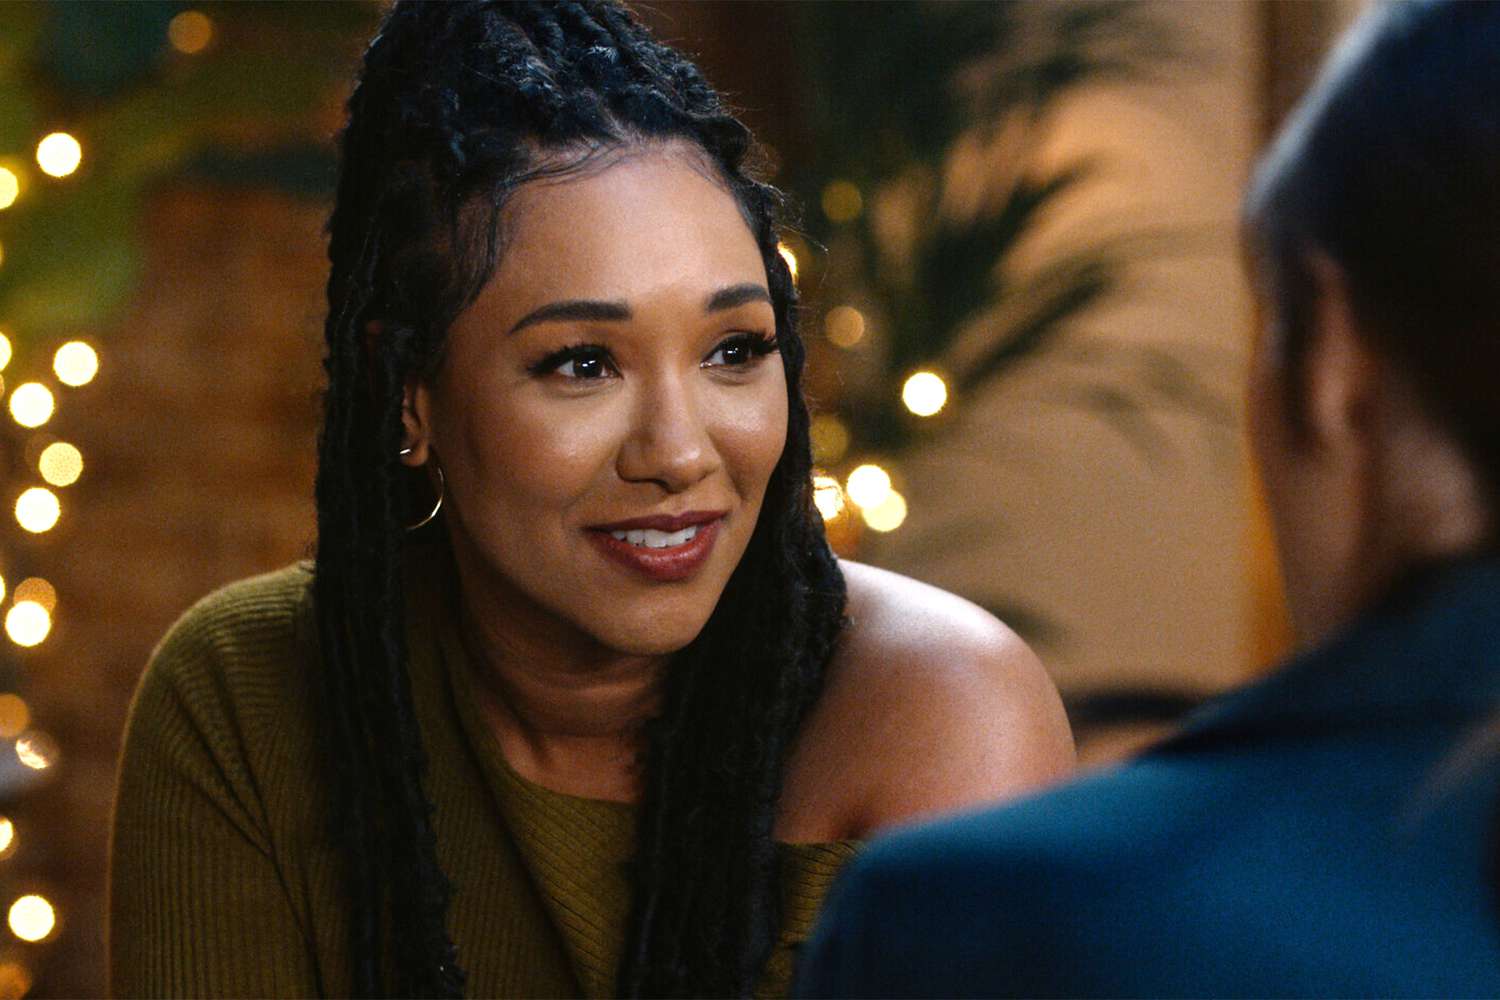 The Flash -- “Wildest Dreams” -- Image Number: FLA907fg_0002r -- Pictured: Candice Patton as Iris West-Allen -- Photo: The CW -- © 2023 The CW Network, LLC. All Rights Reserved.